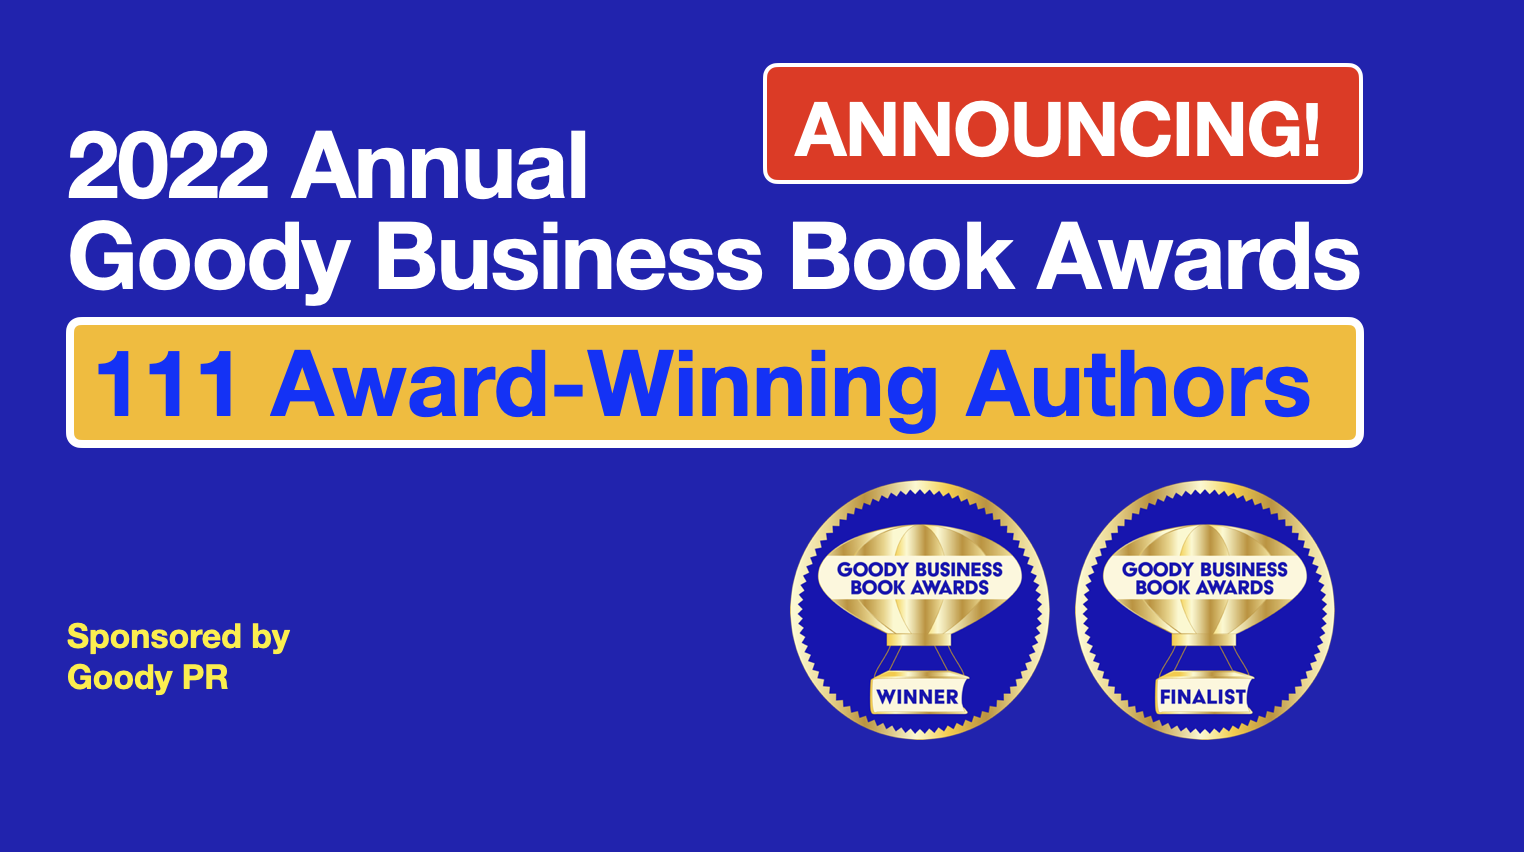 The Annual Goody Business Book Awards announces 111 Winners and Finalists for their 2022 book awards in 45 Categories and 10 Genres to help shine a light on authors making a difference with words.